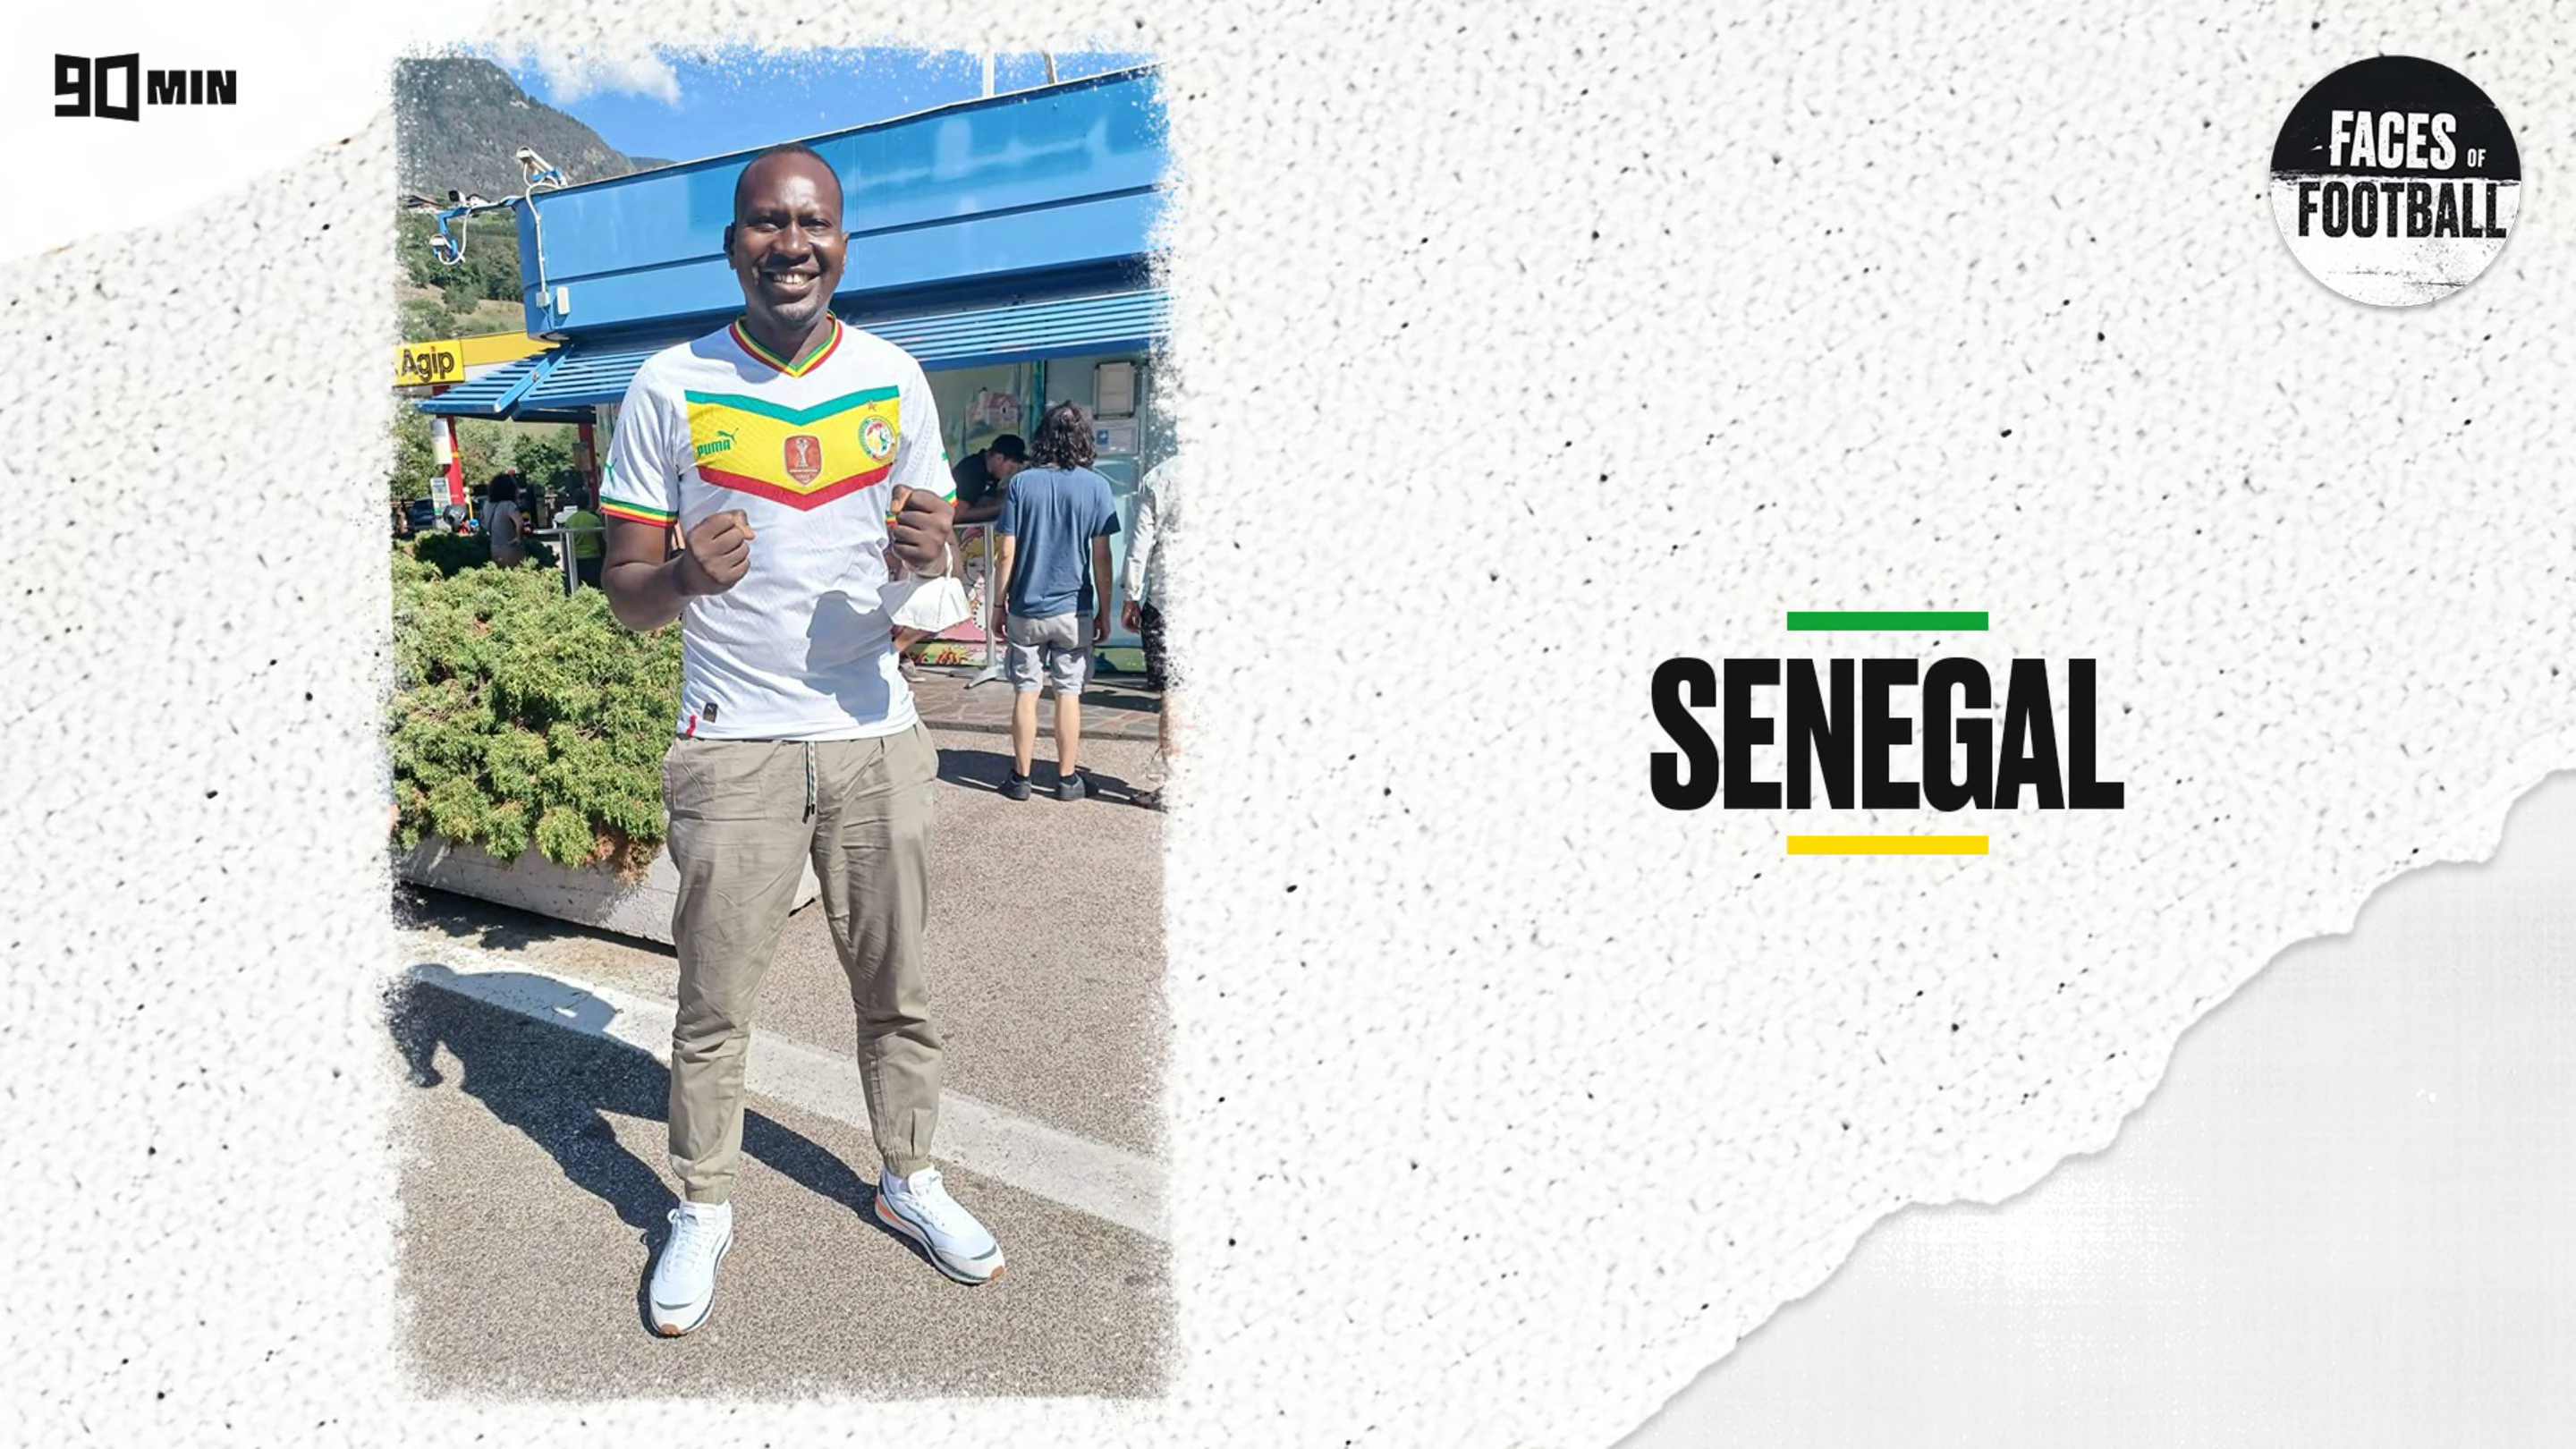 Faces of Football: Senegal - a letter to the national team